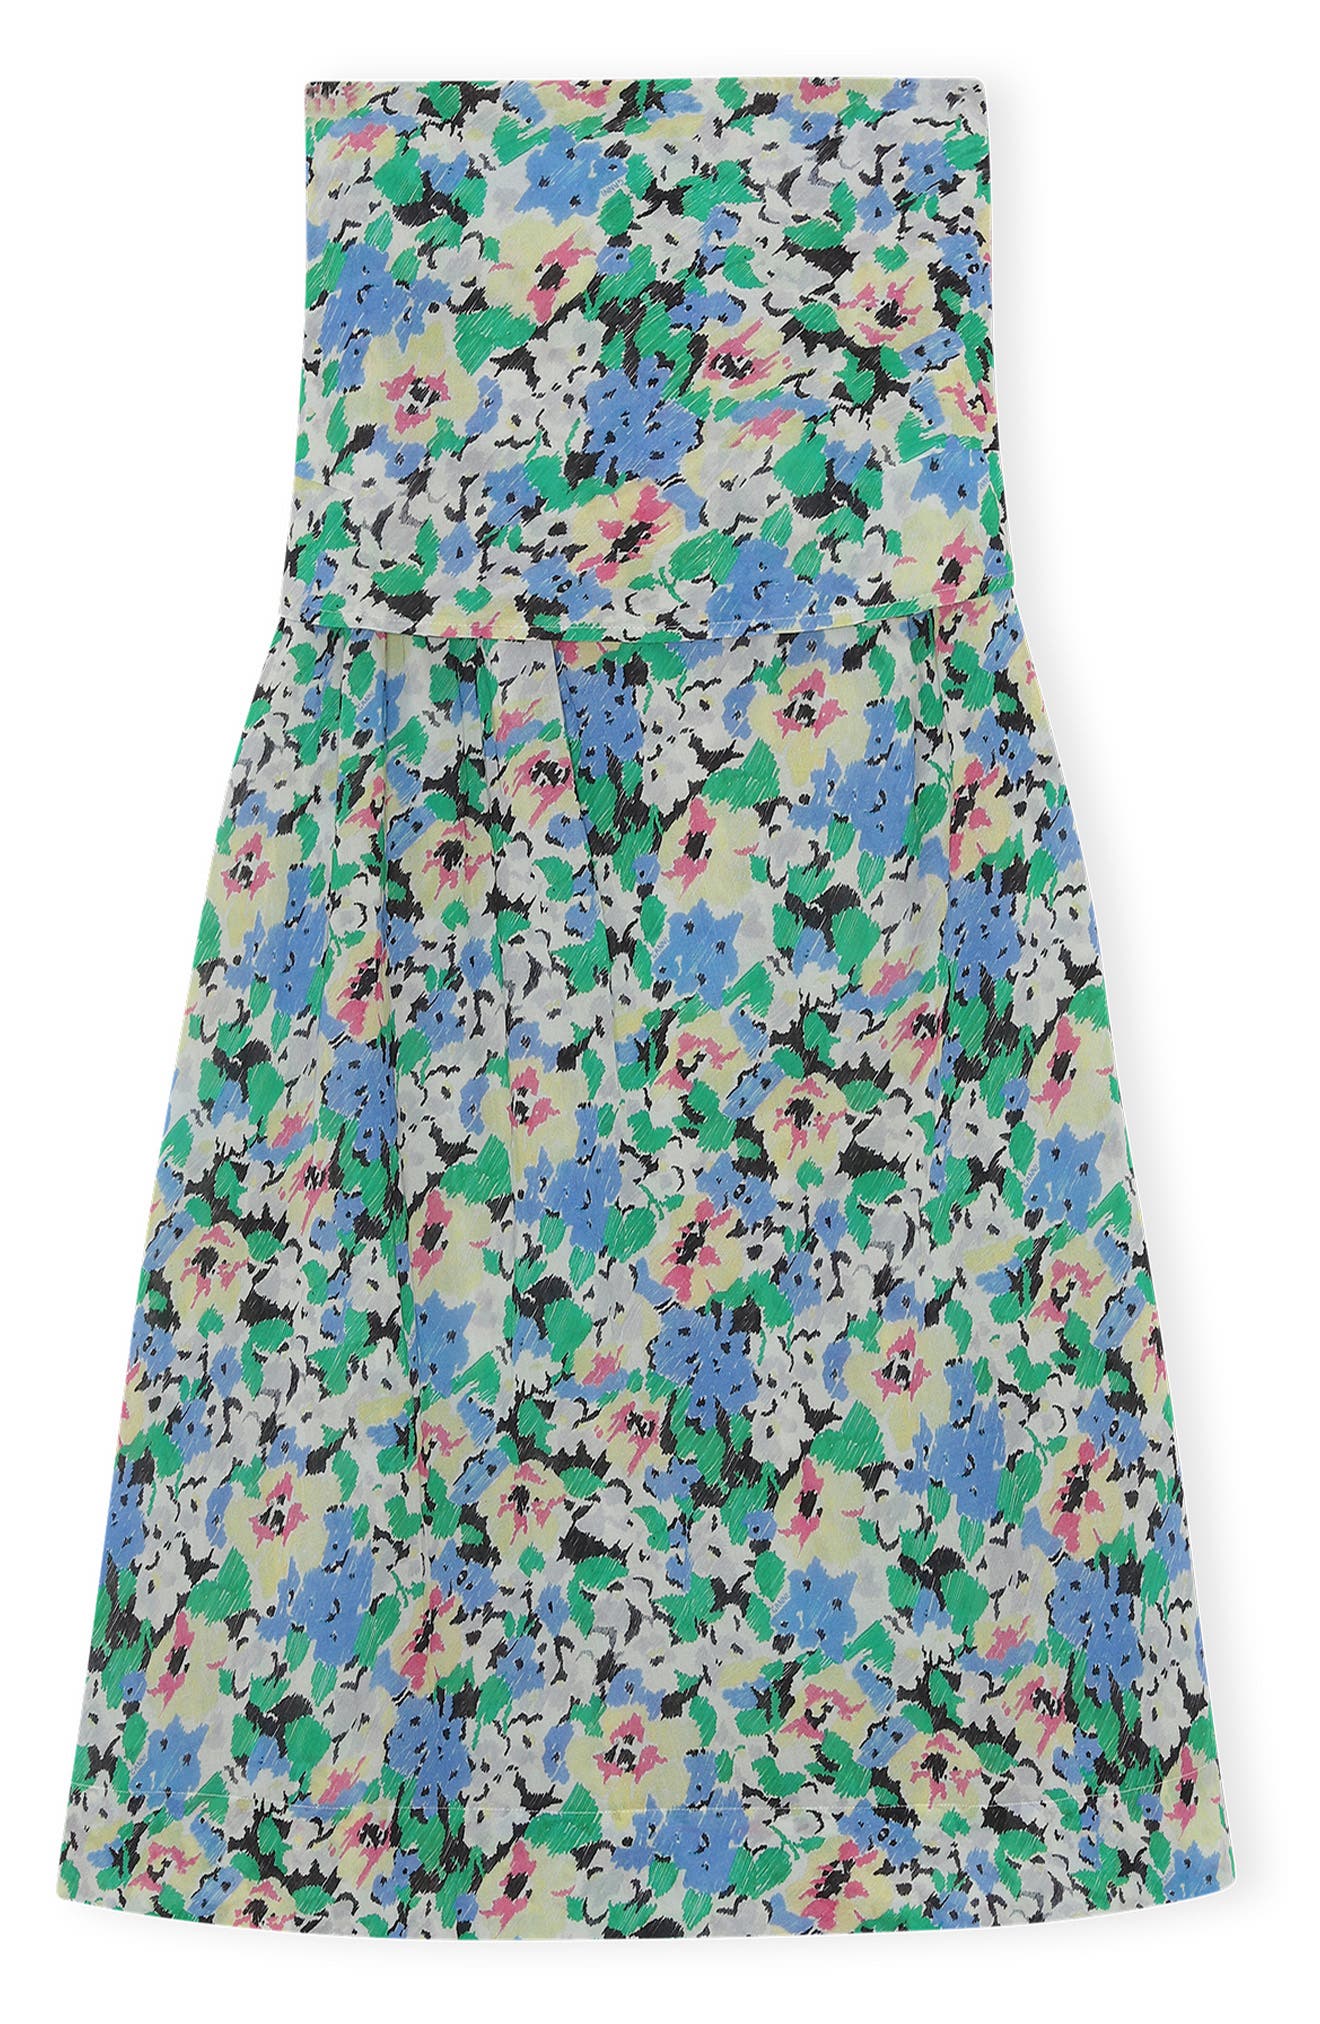 Ganni Strapless Organic Cotton Maxi Dress in Floral Azure Blue at Nordstrom, Size Xx-Large